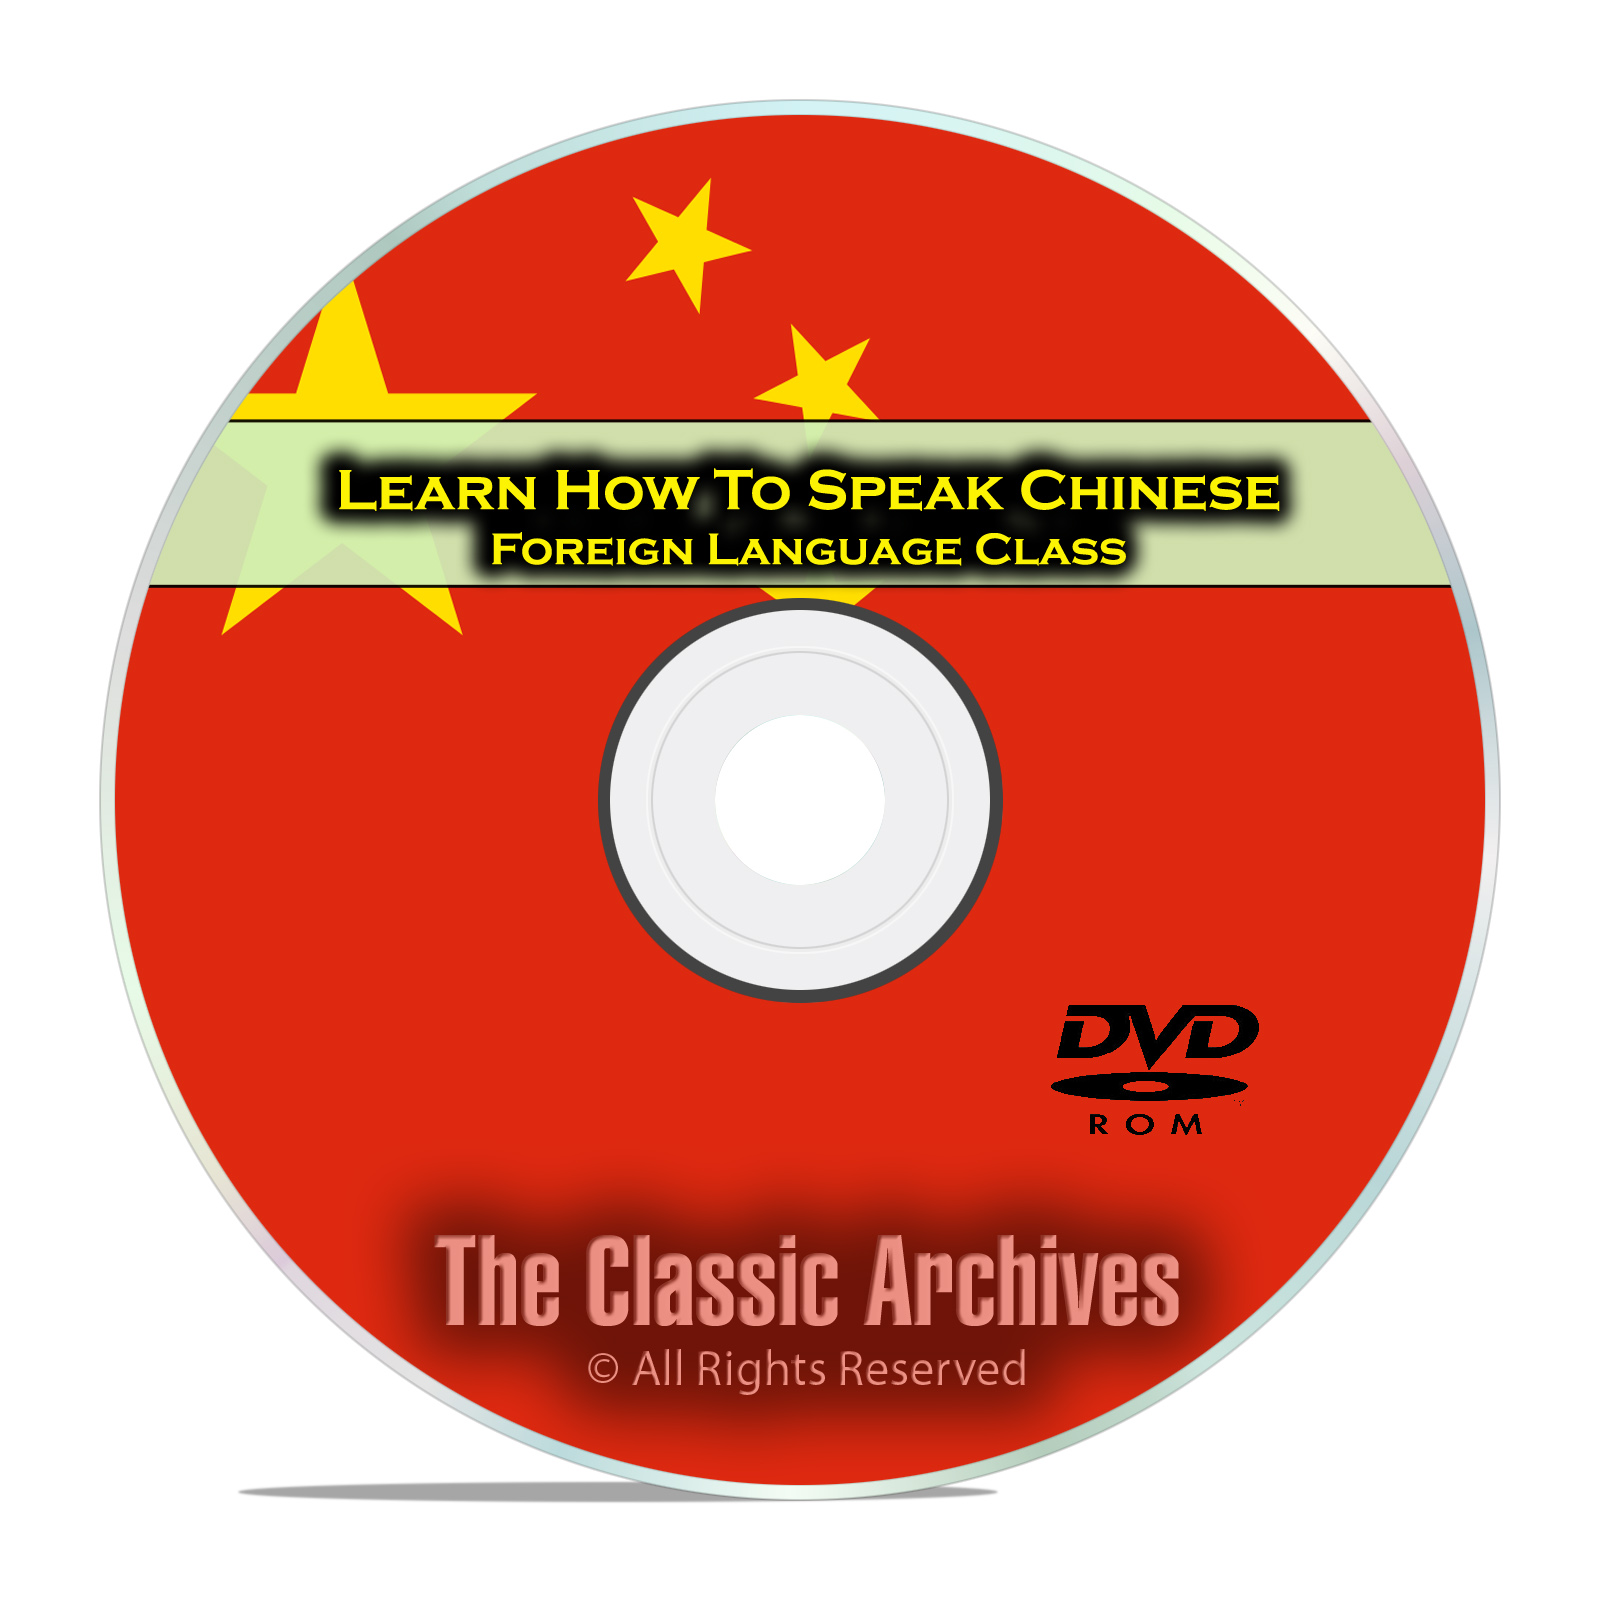 Learn How To Speak Chinese, Fast Foreign Language Training Course, DVD